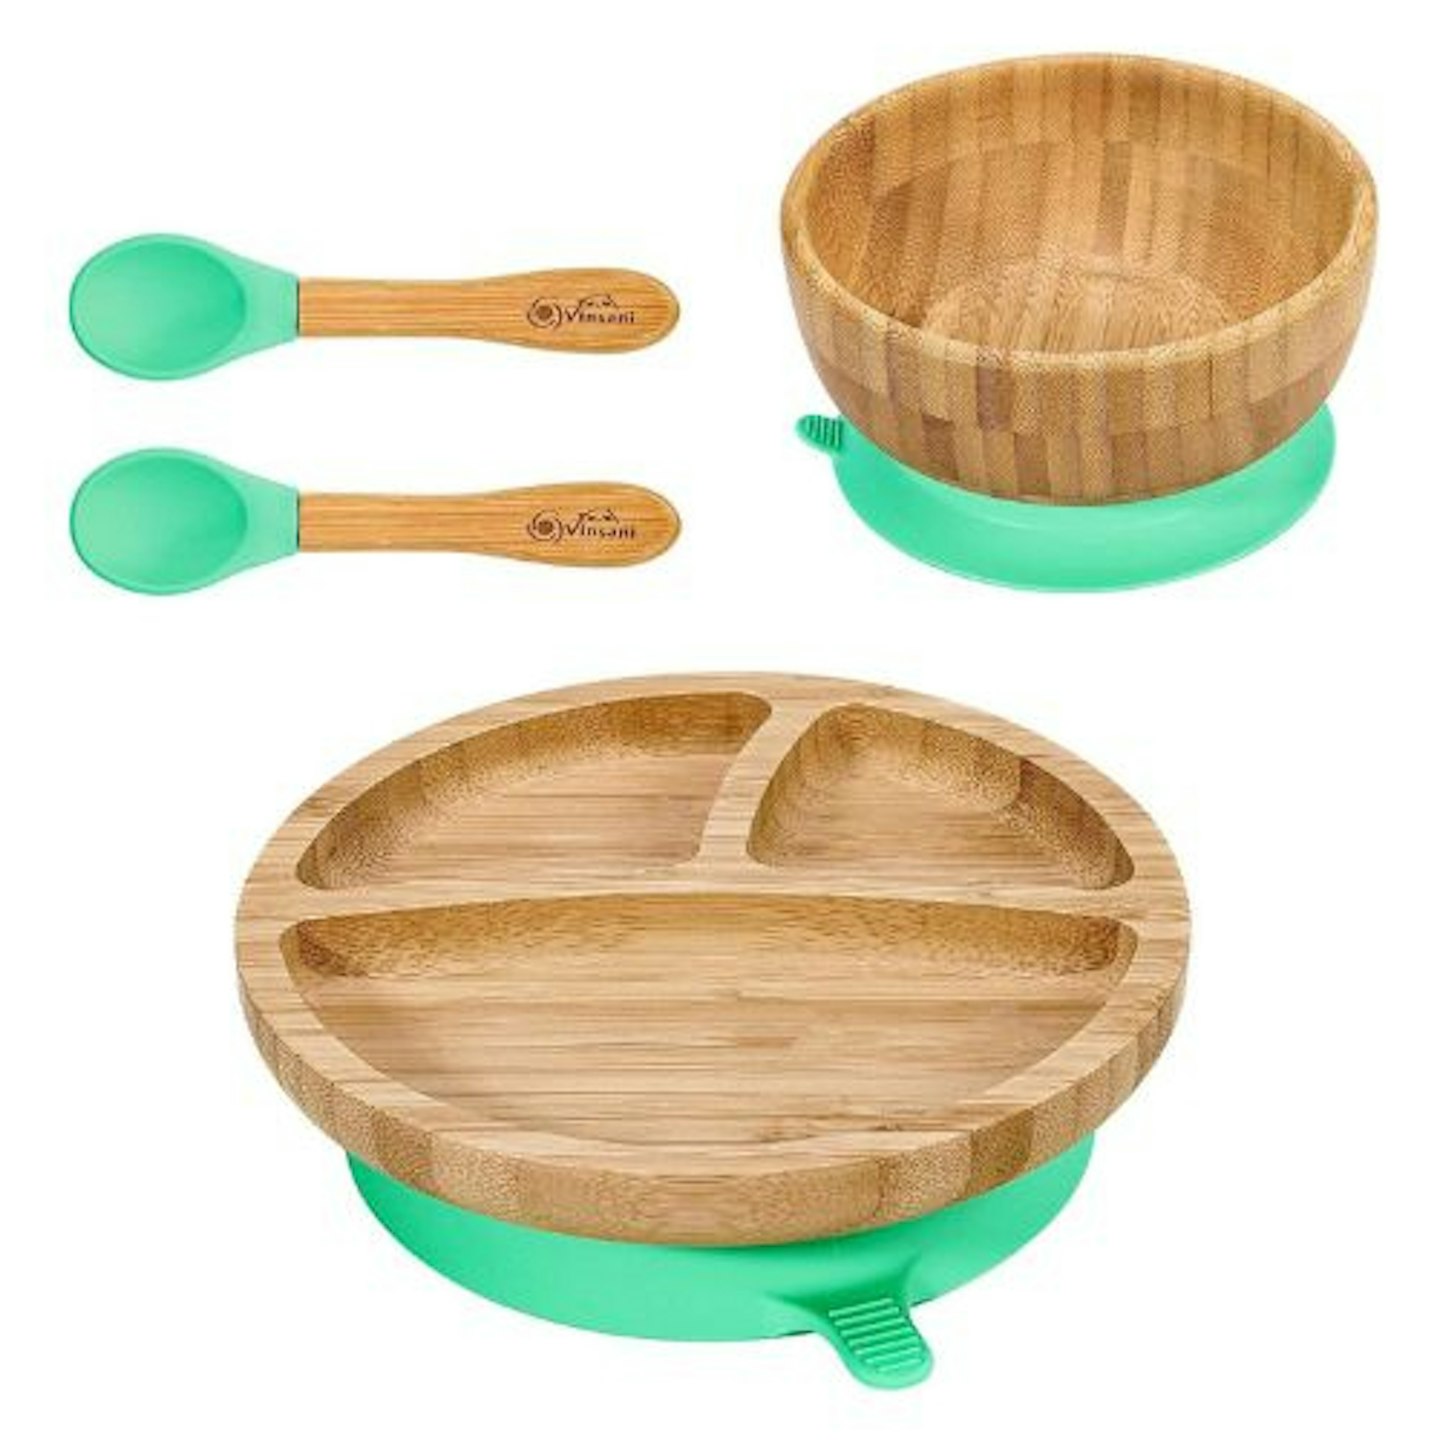 Vinsani Bamboo Bowl, Round Plate and Spoon Set